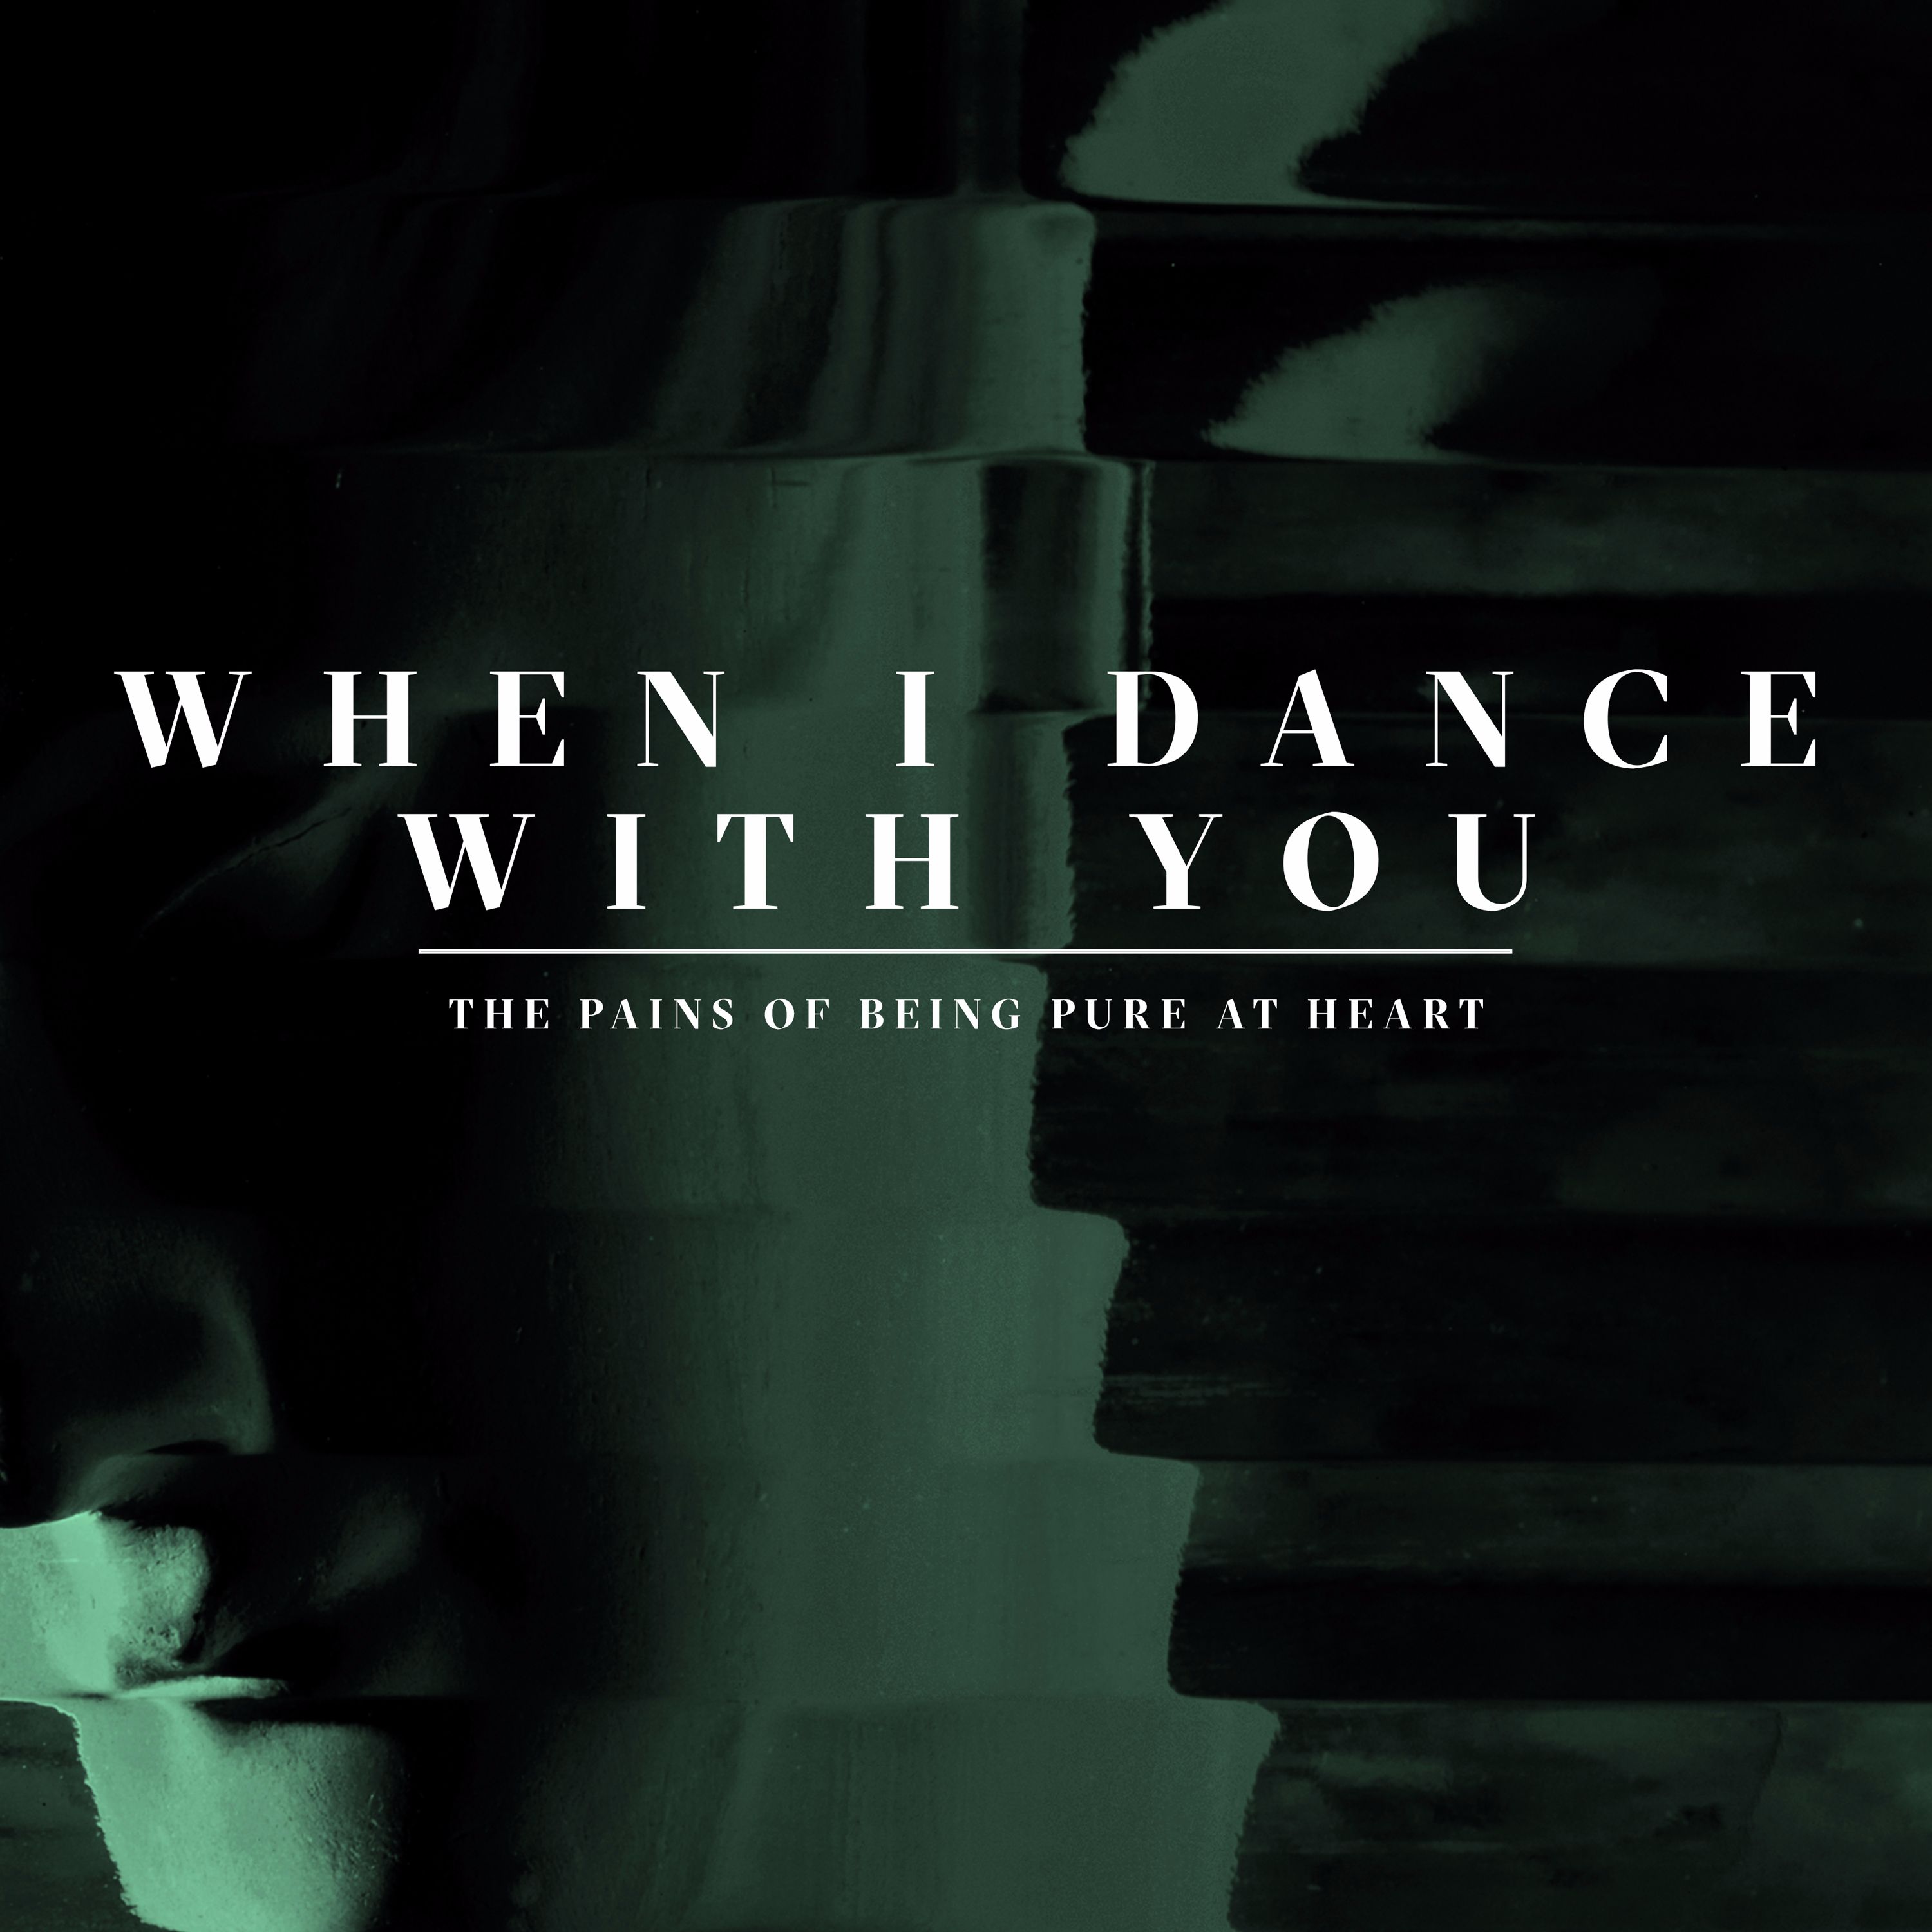 The Pains of Being Pure at Heart – “When I Dance With You”